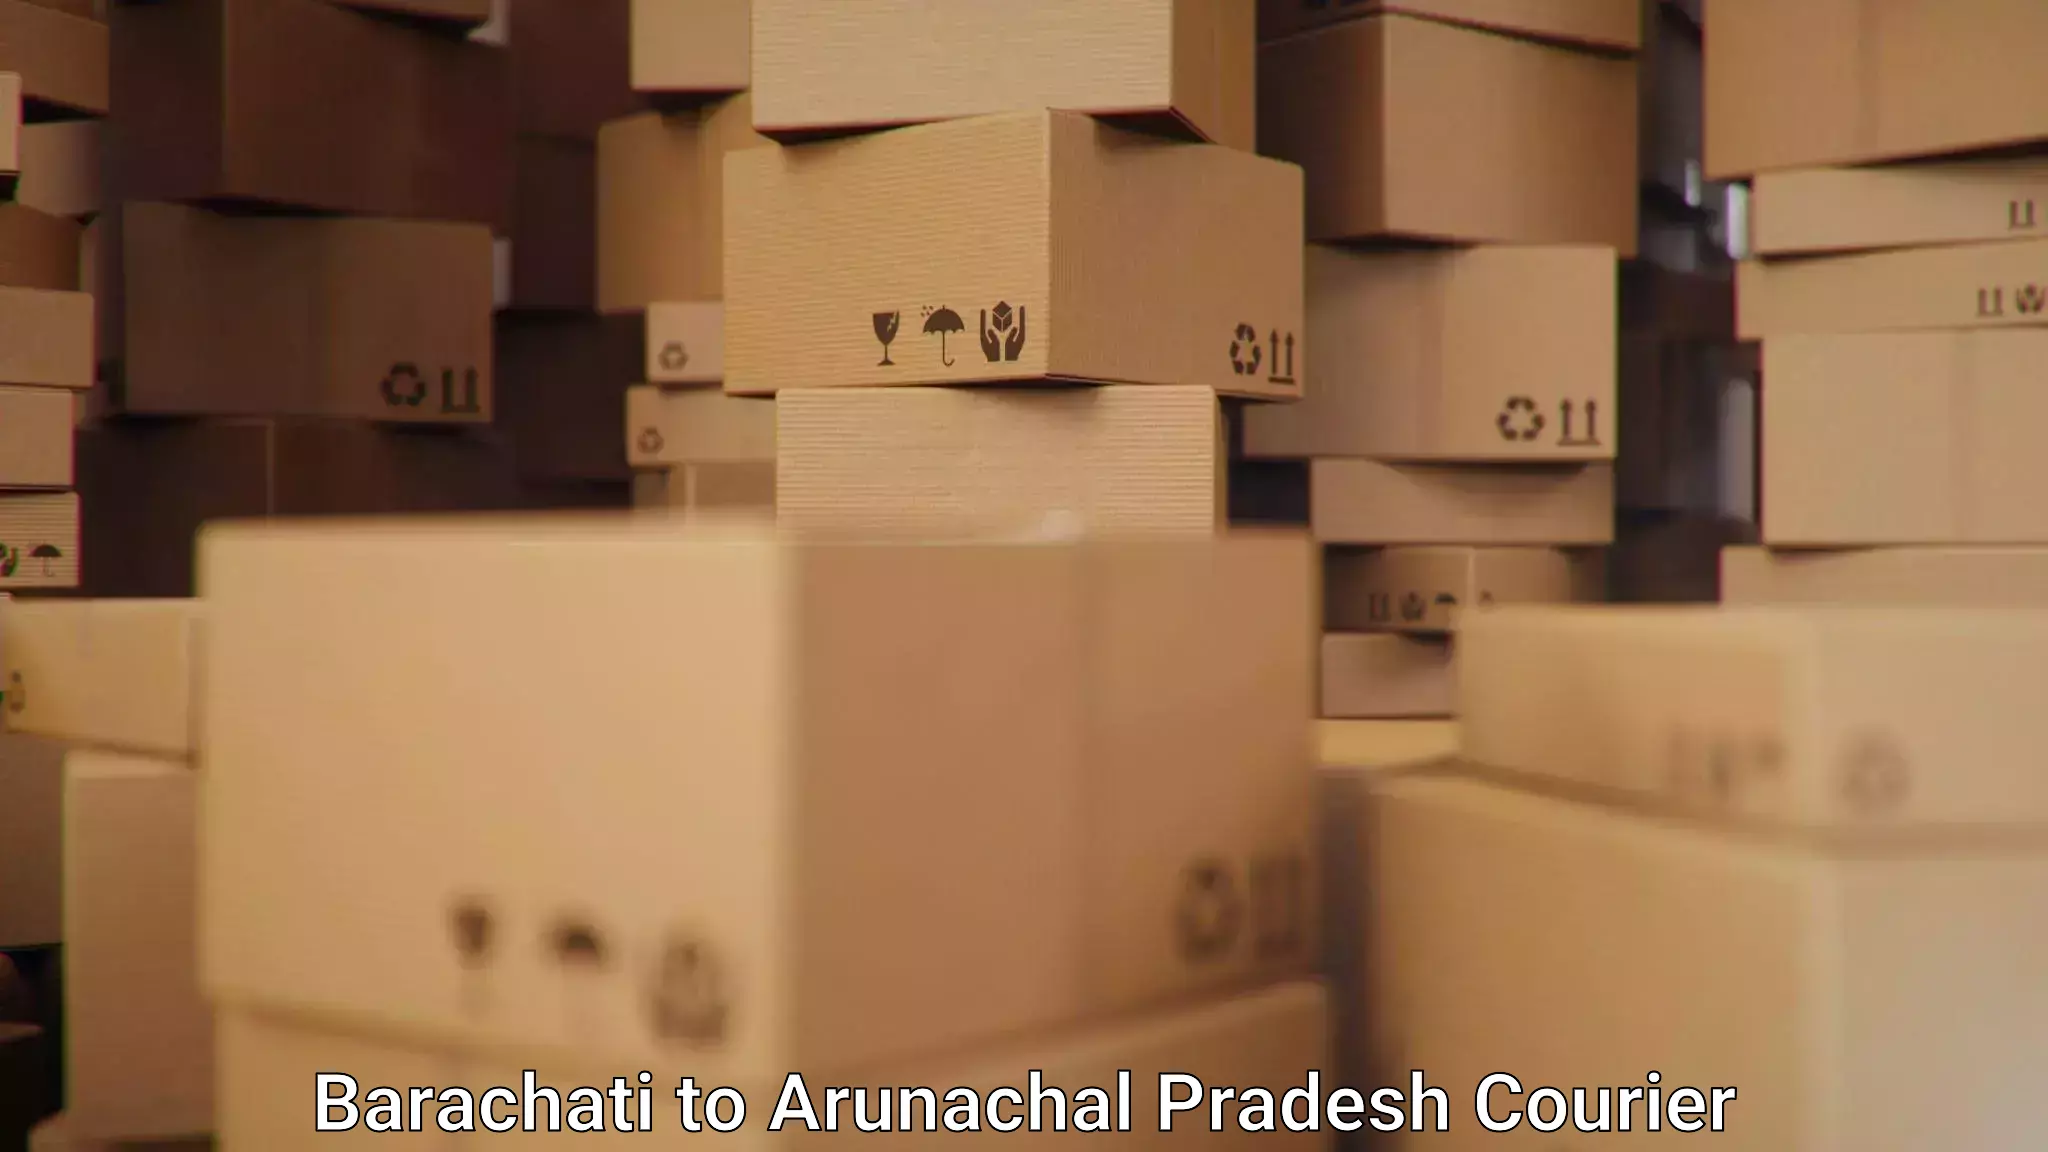 Professional courier handling Barachati to Aalo